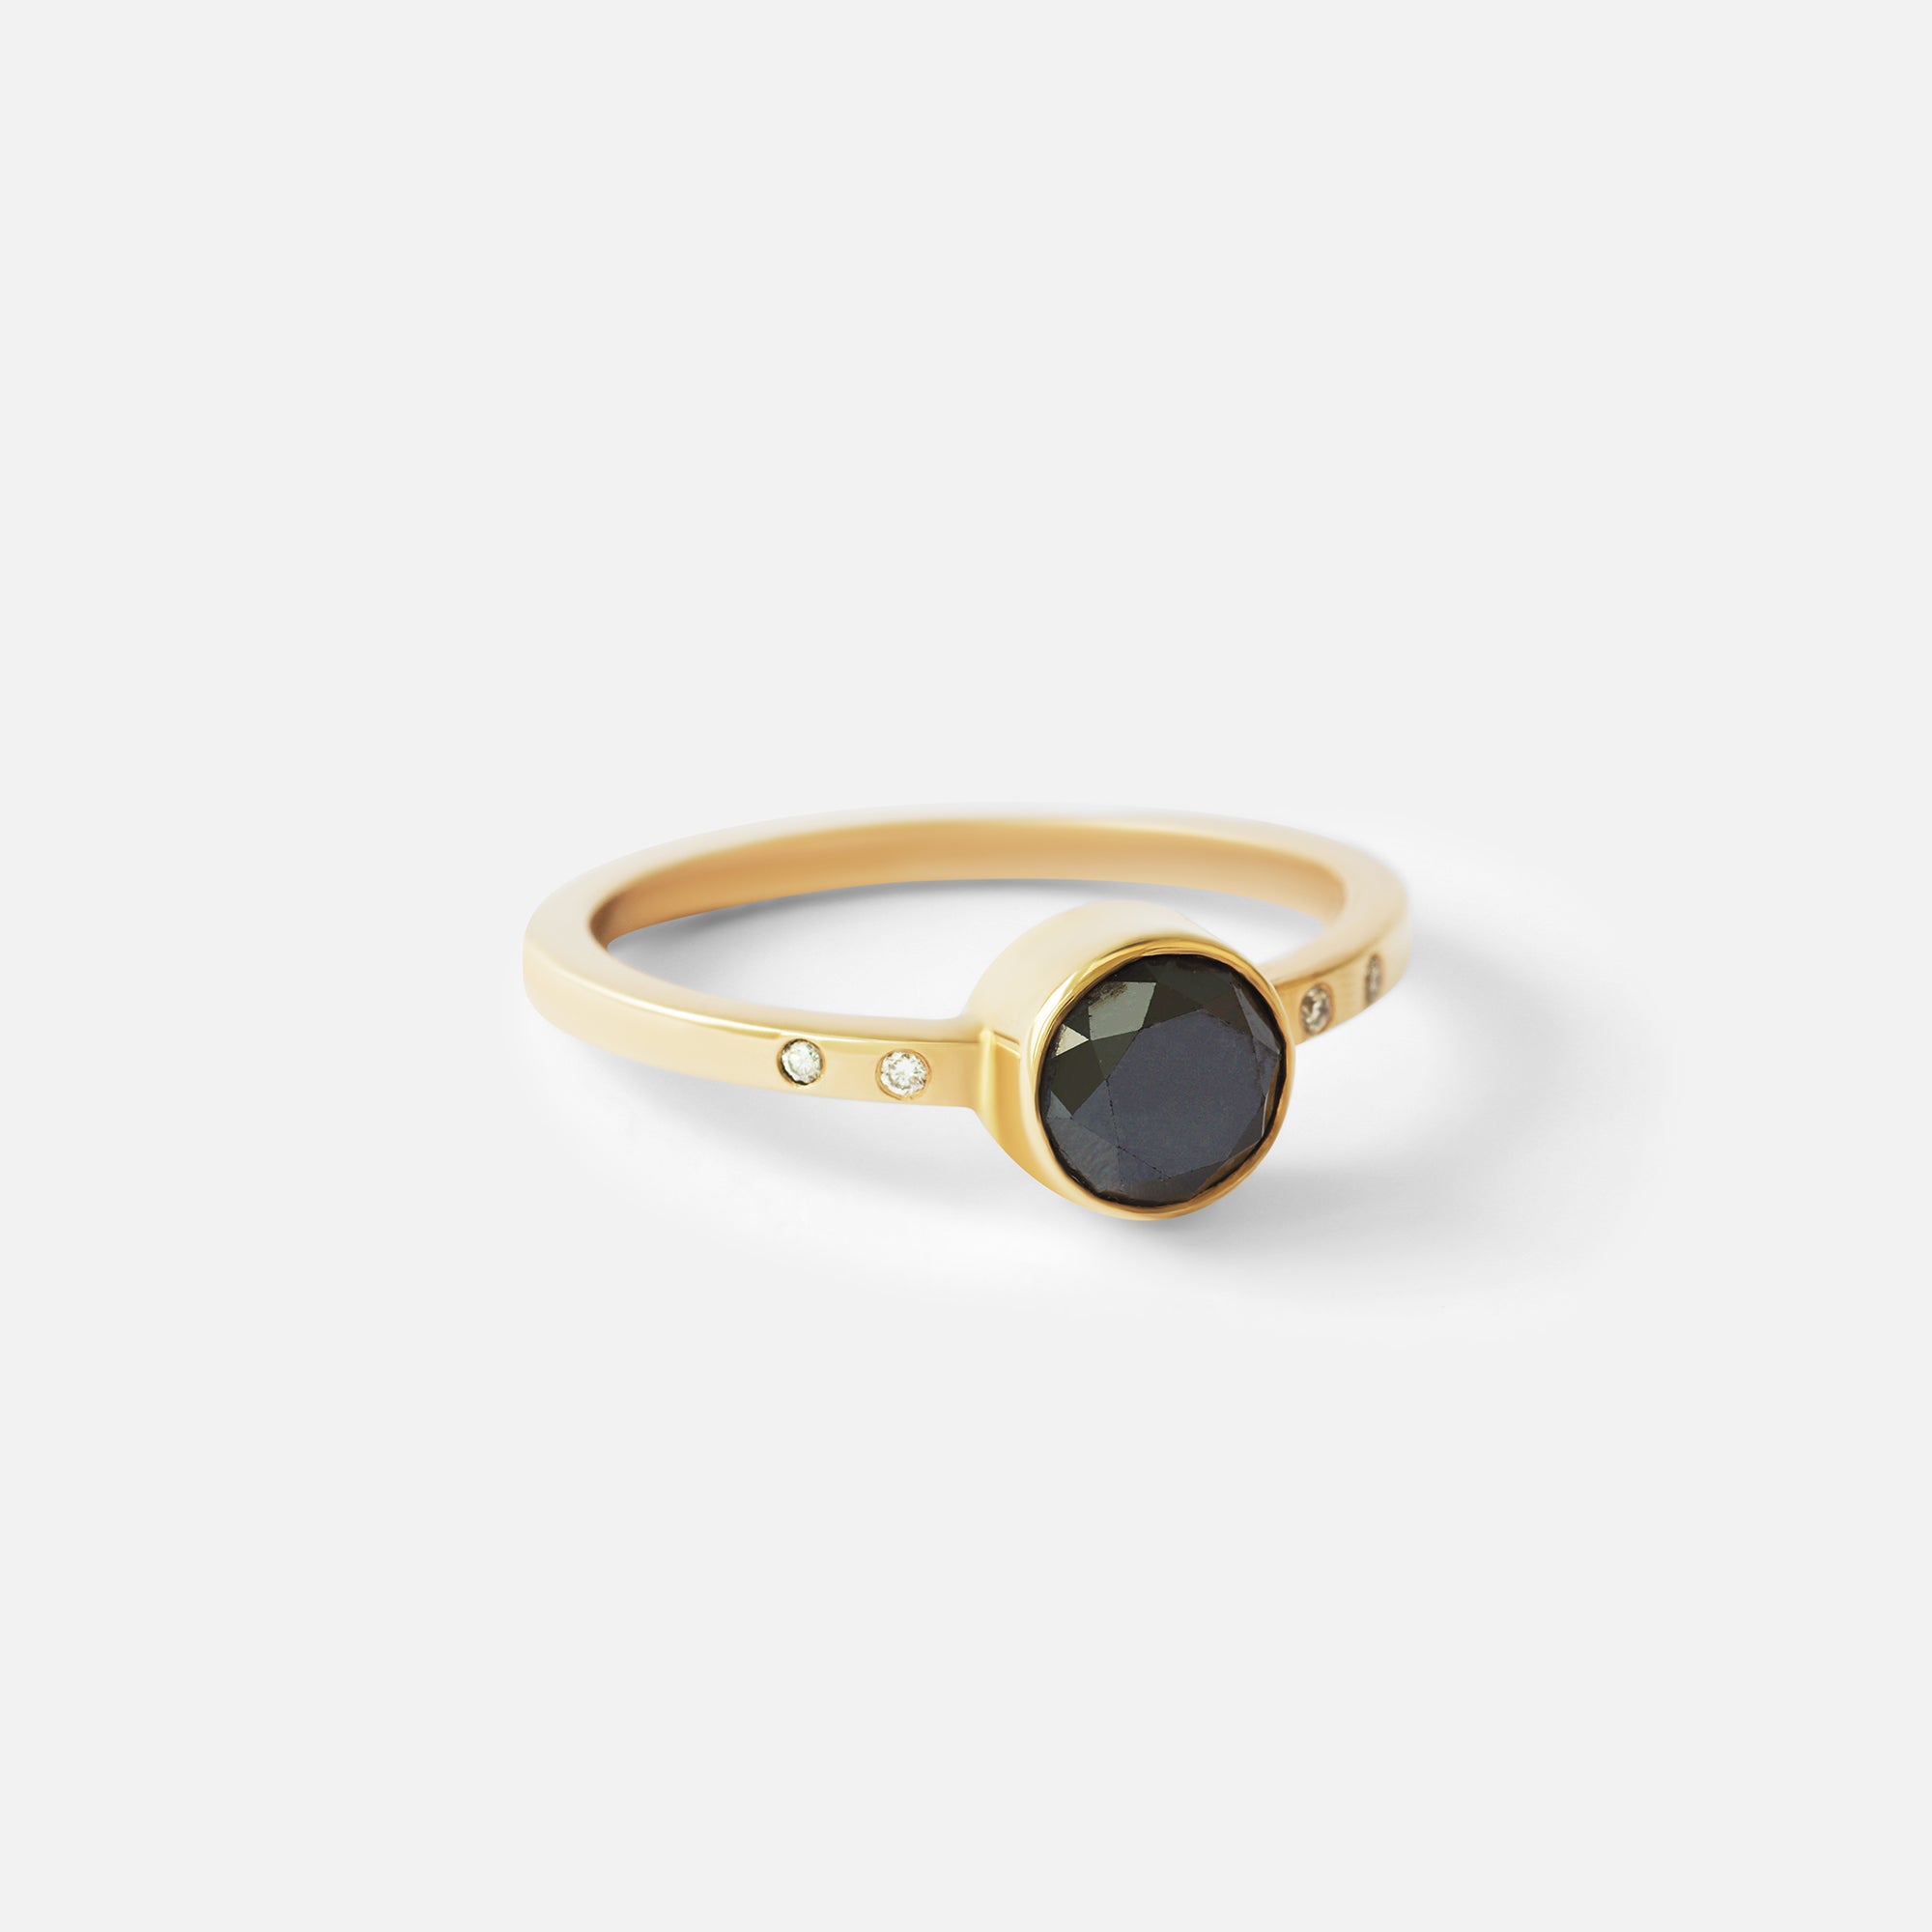 Black Diamond / Ring By Nishi in ENGAGEMENT Category